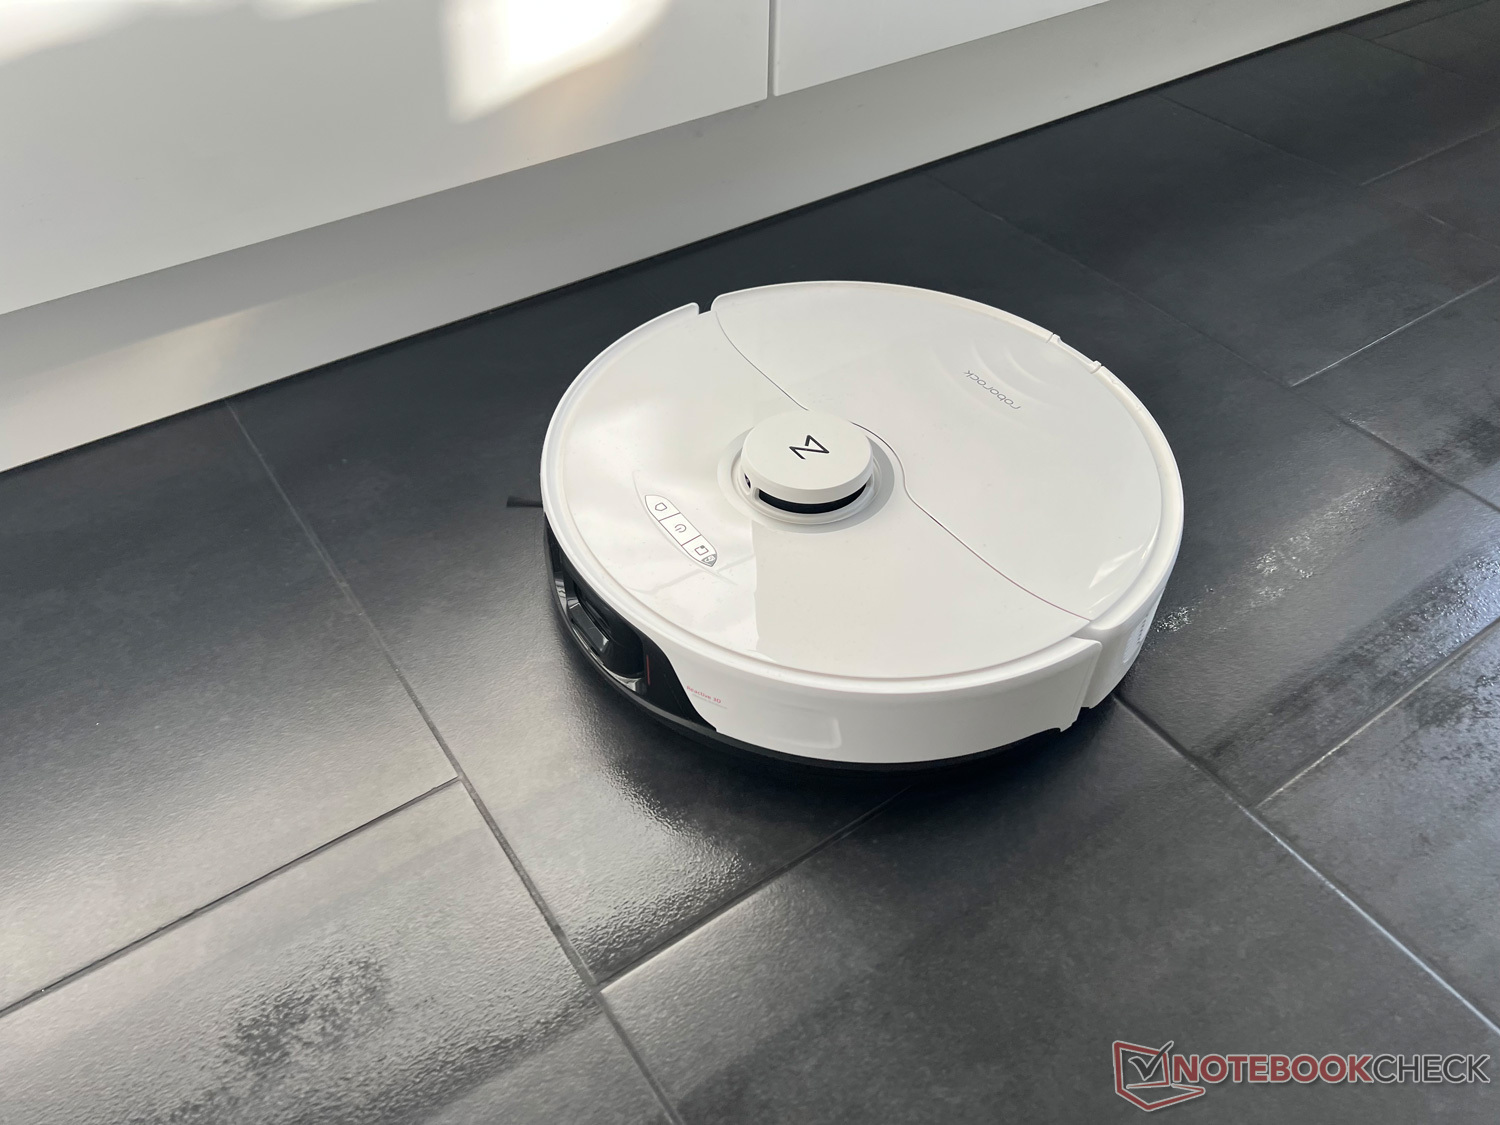 Roborock reveals its new S8 Pro Ultra robot vacuum and cleaning